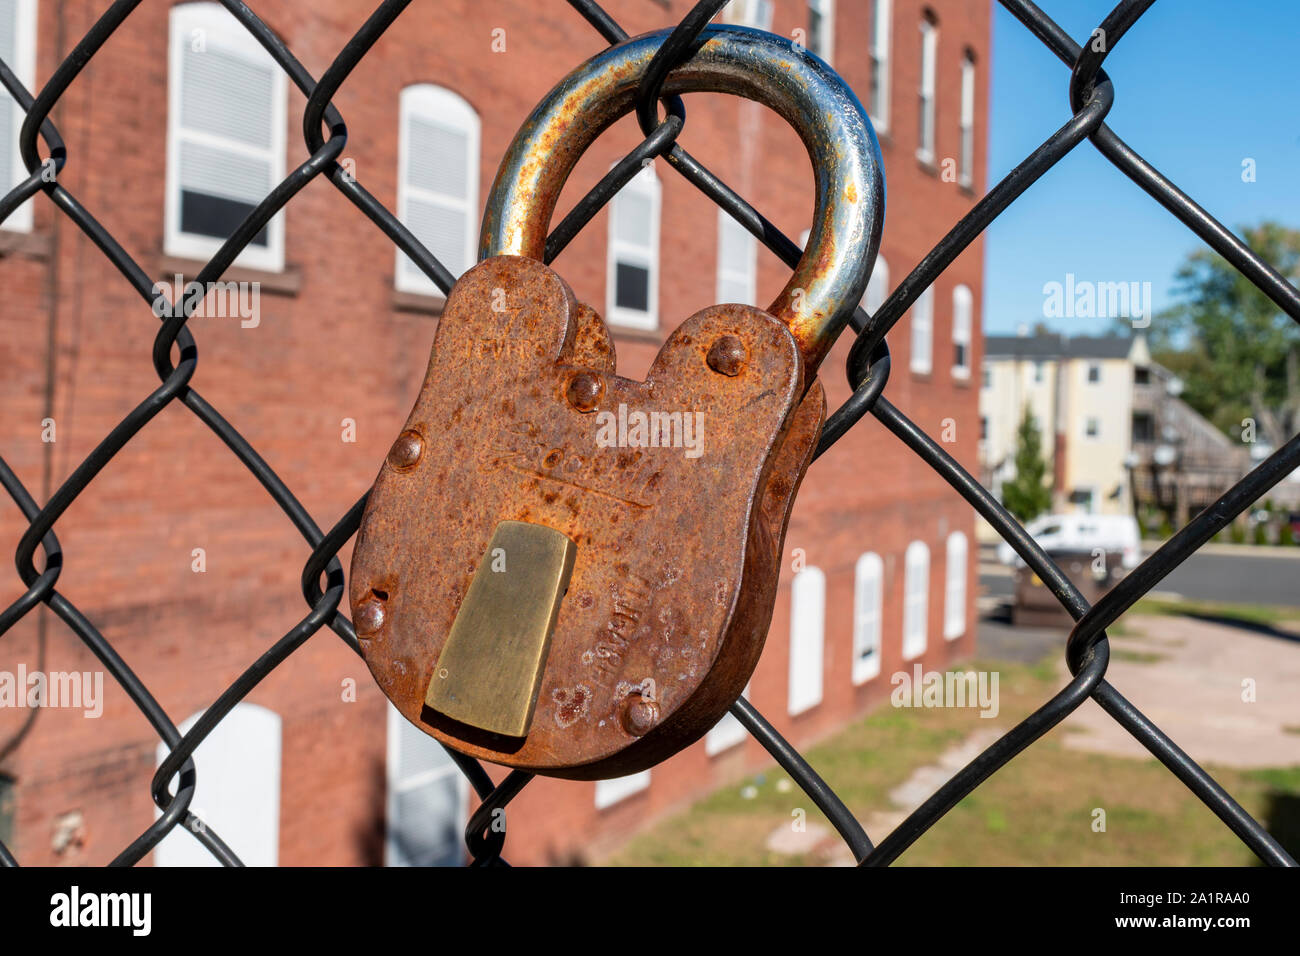 locks on a wire fence Stock Photo